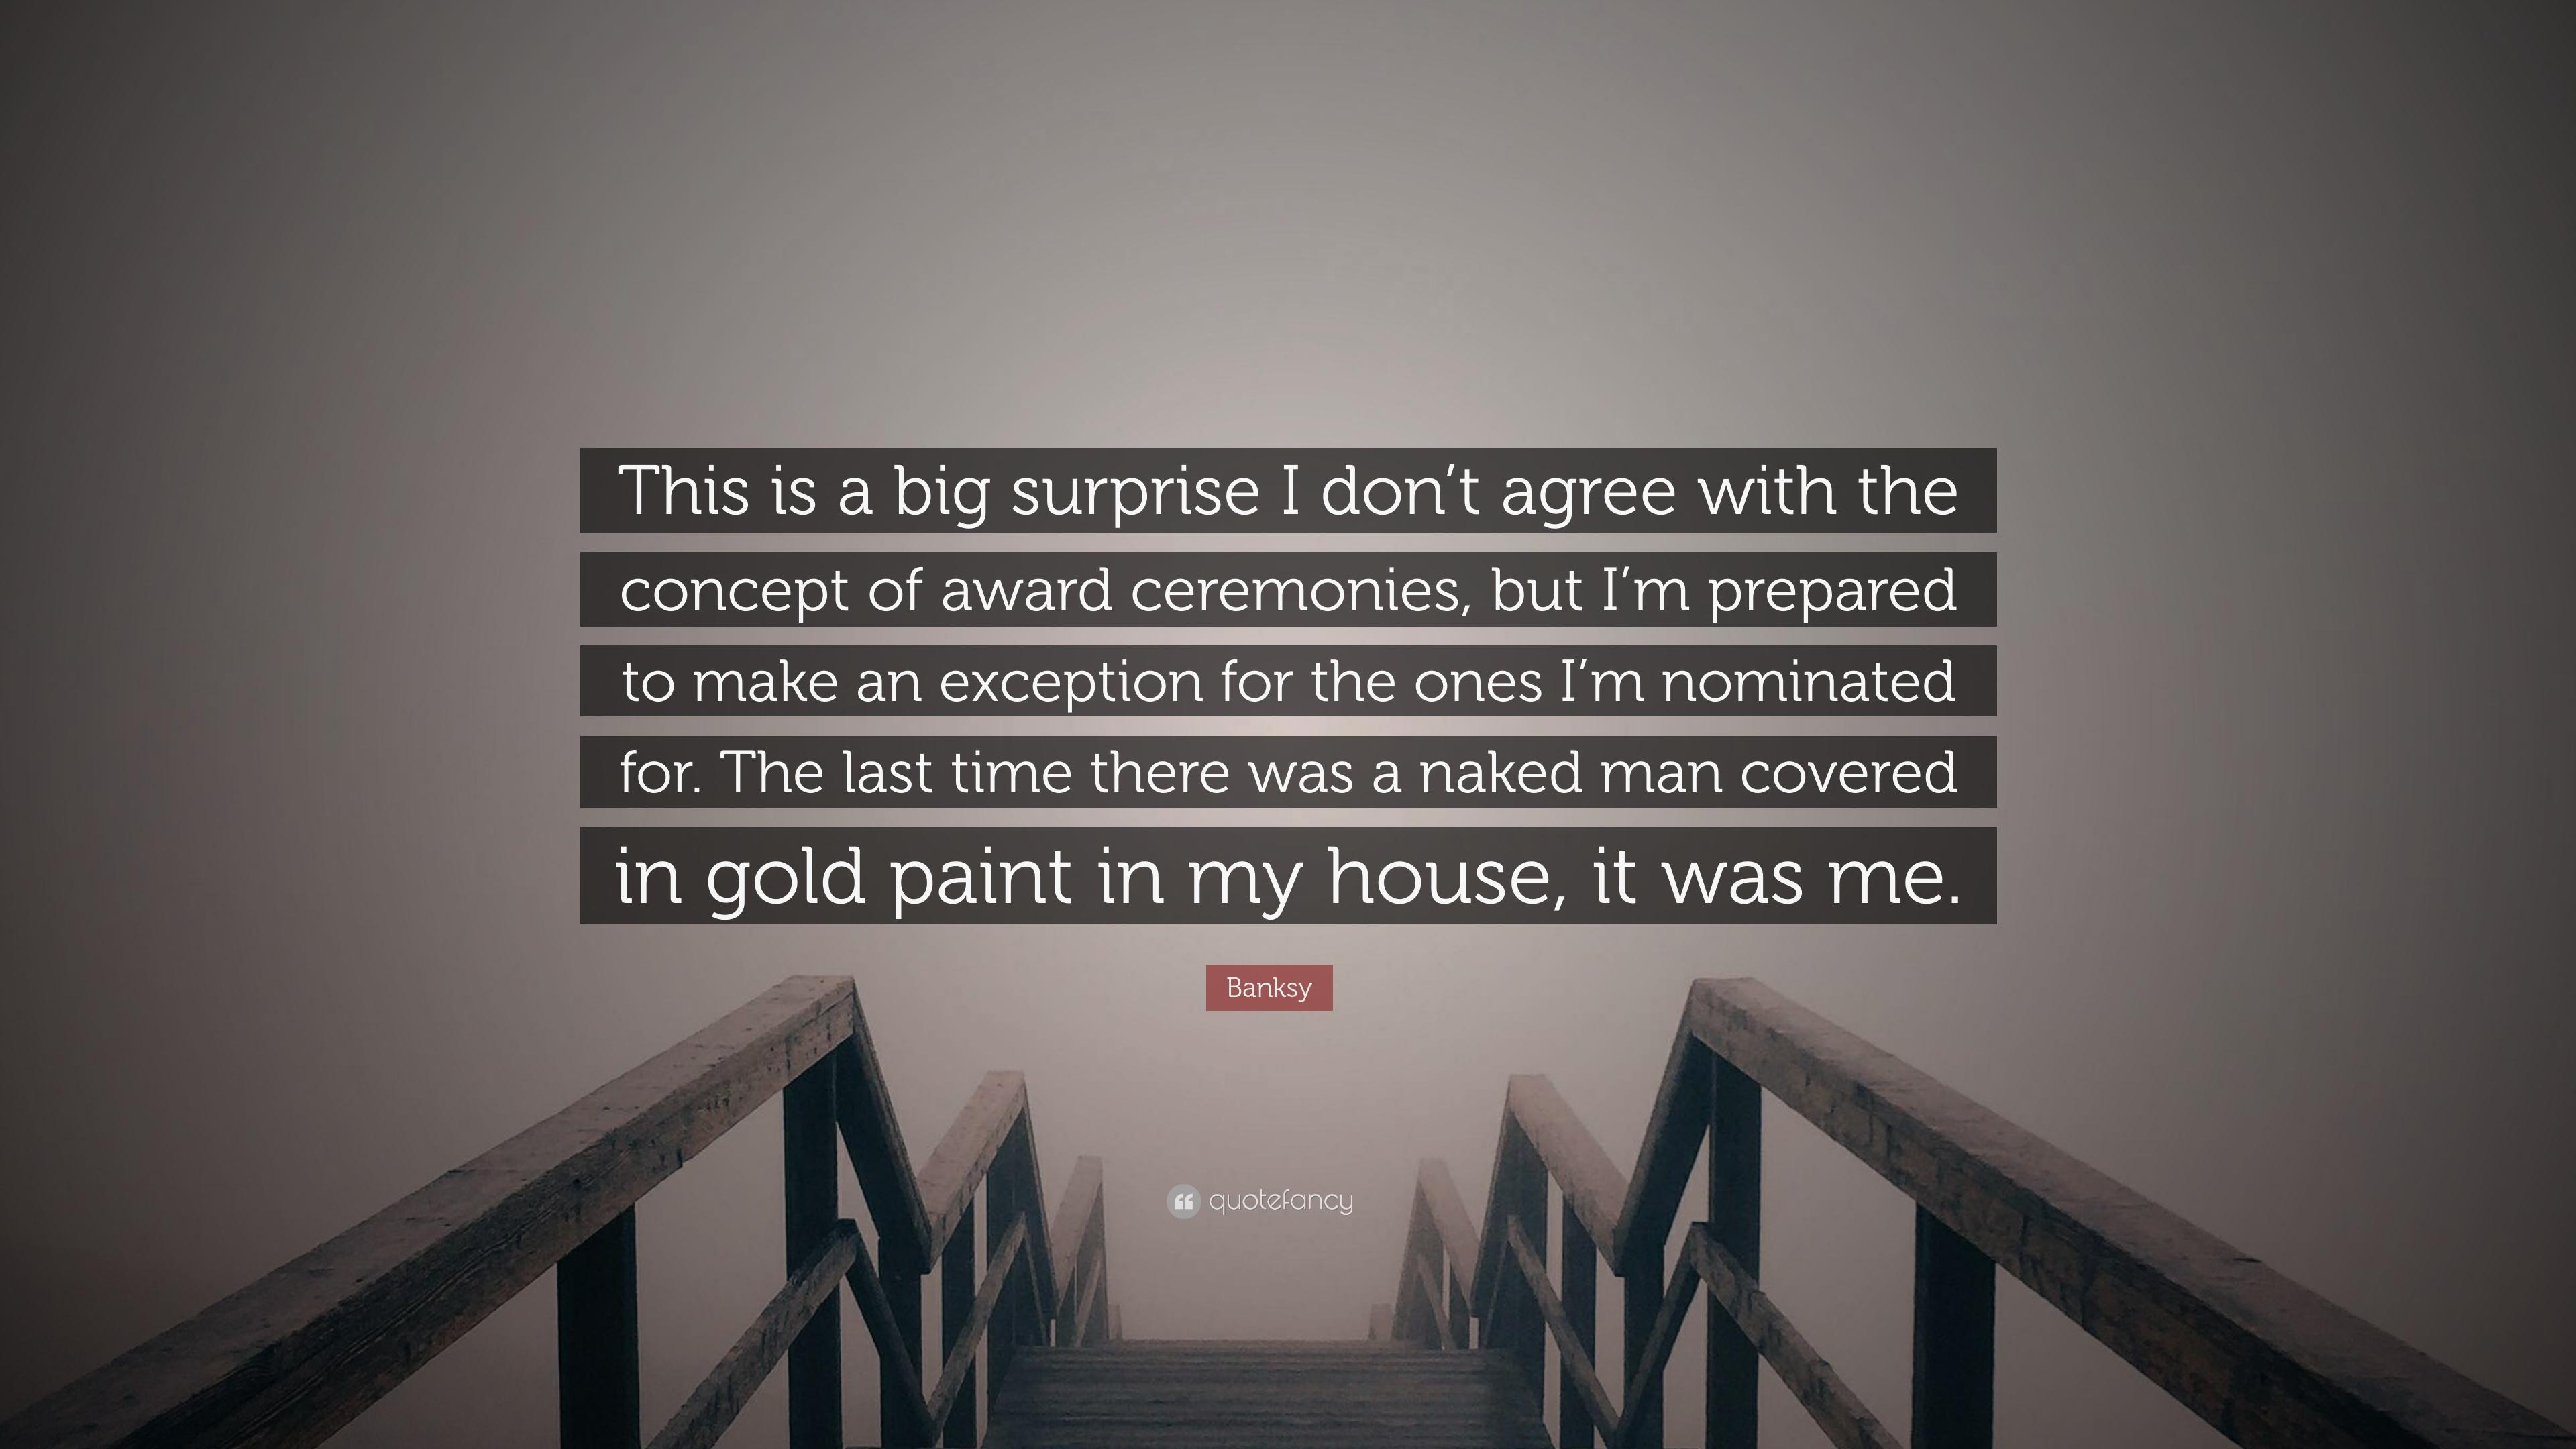 Banksy Quote: “This is a big surprise I don't agree with